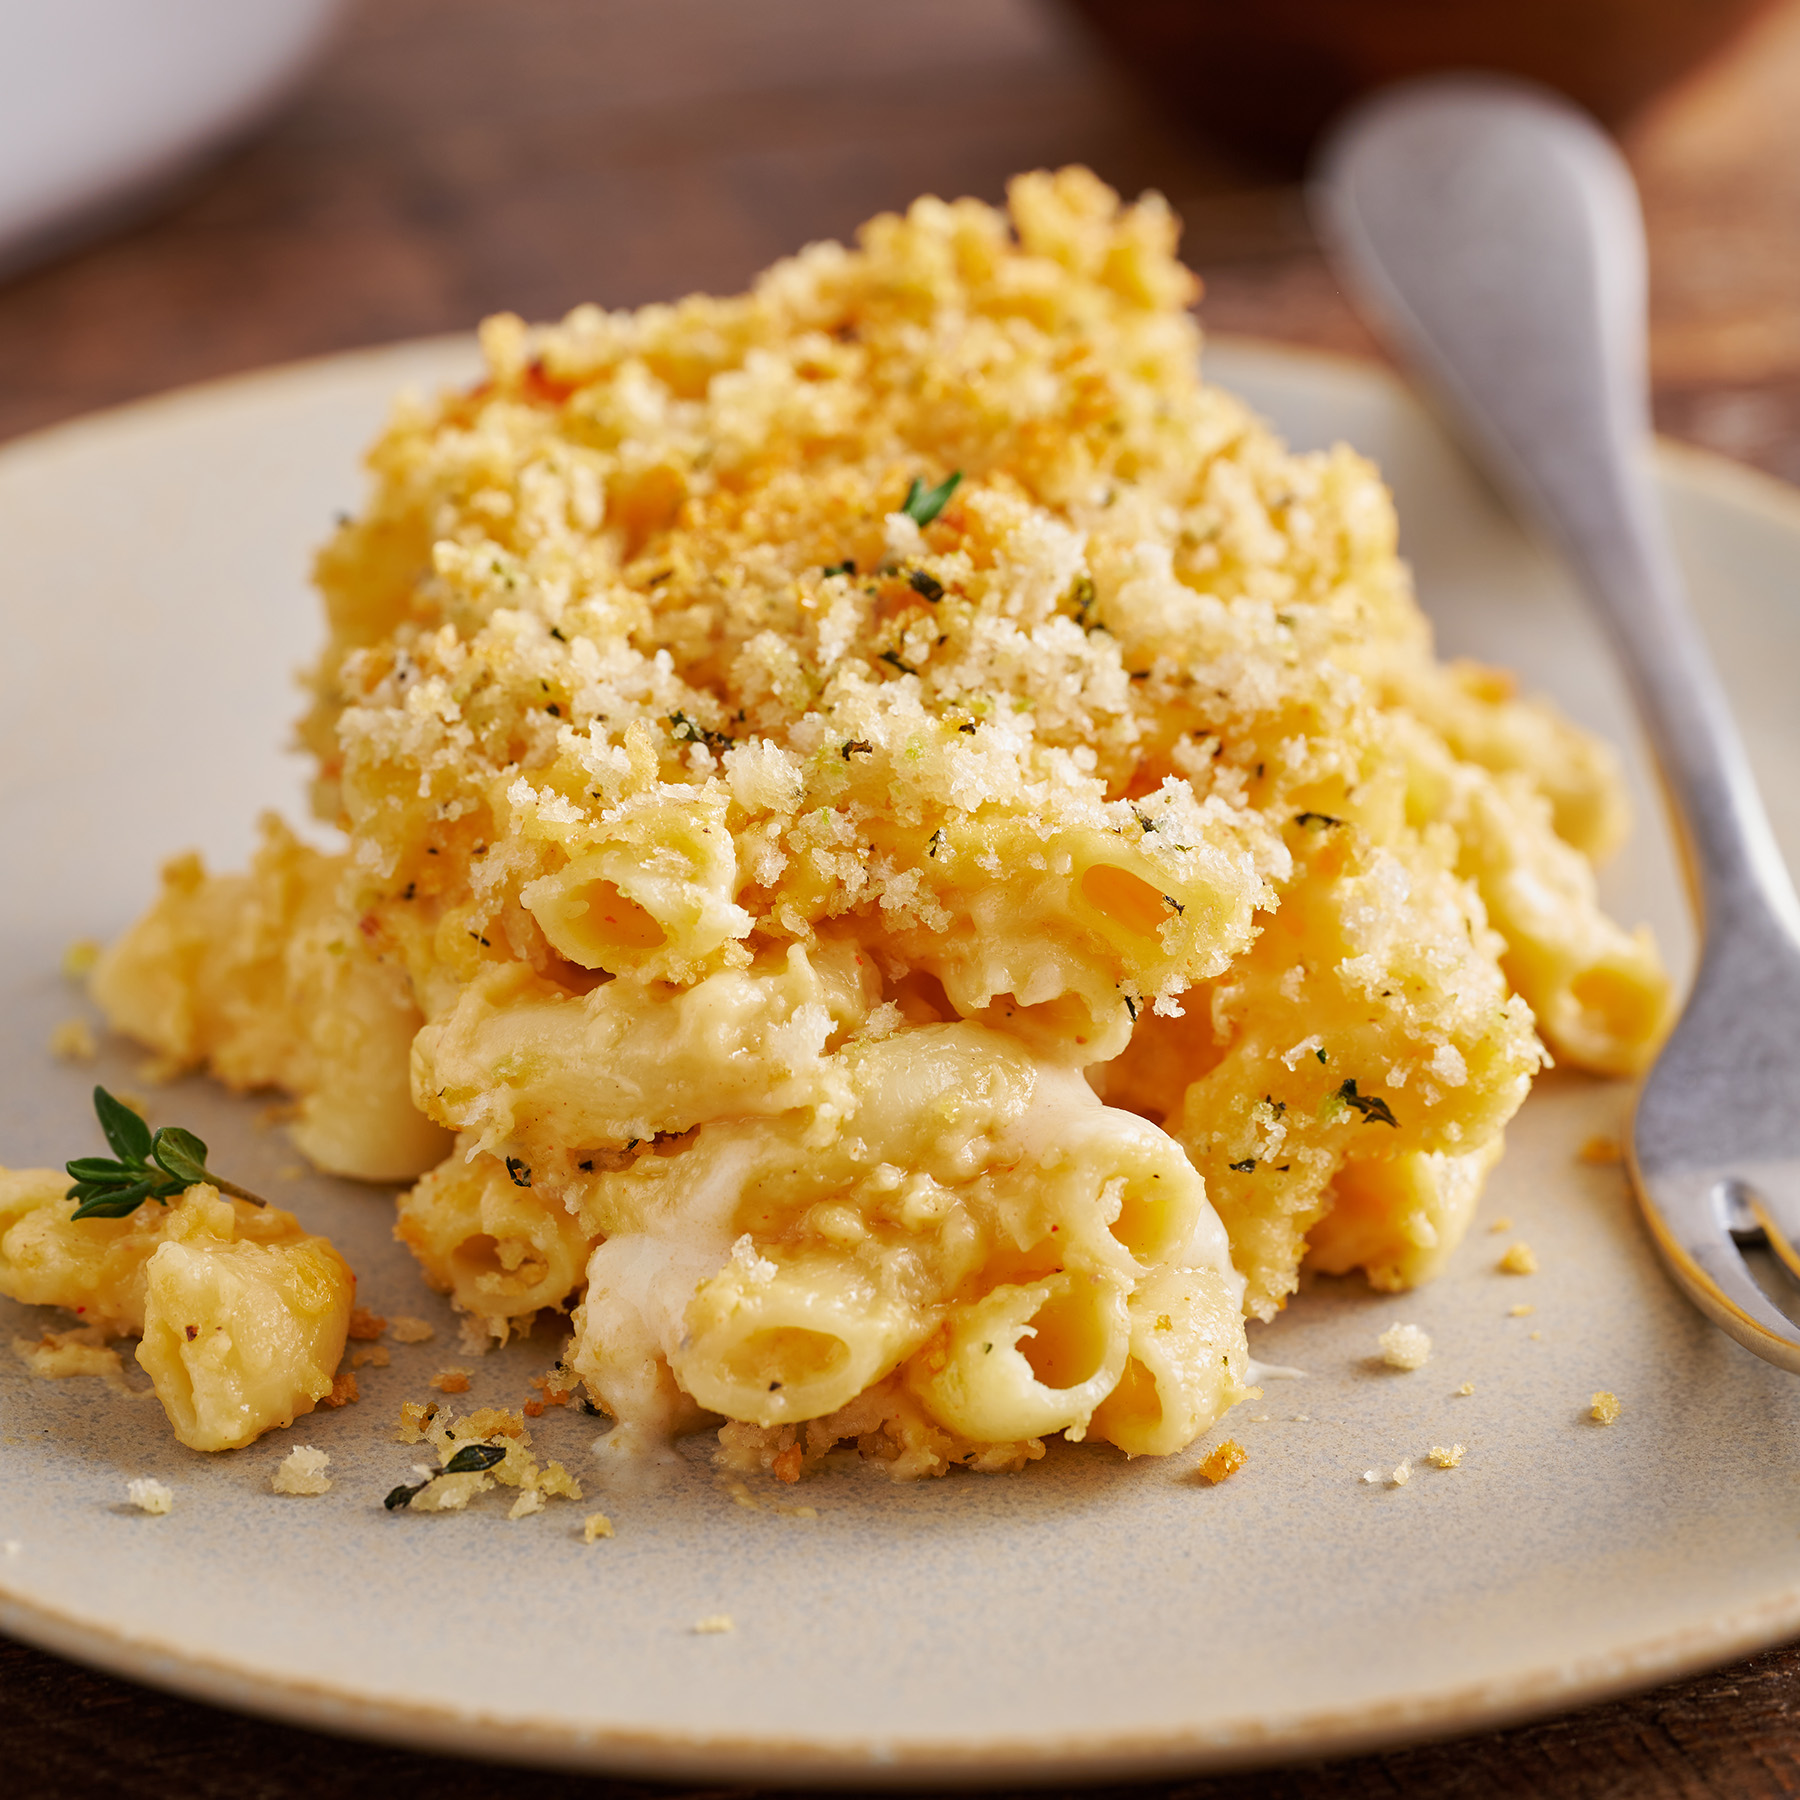 homemade baked macaroni and cheese with creamy cheese sauce and panko breadcrumb topping